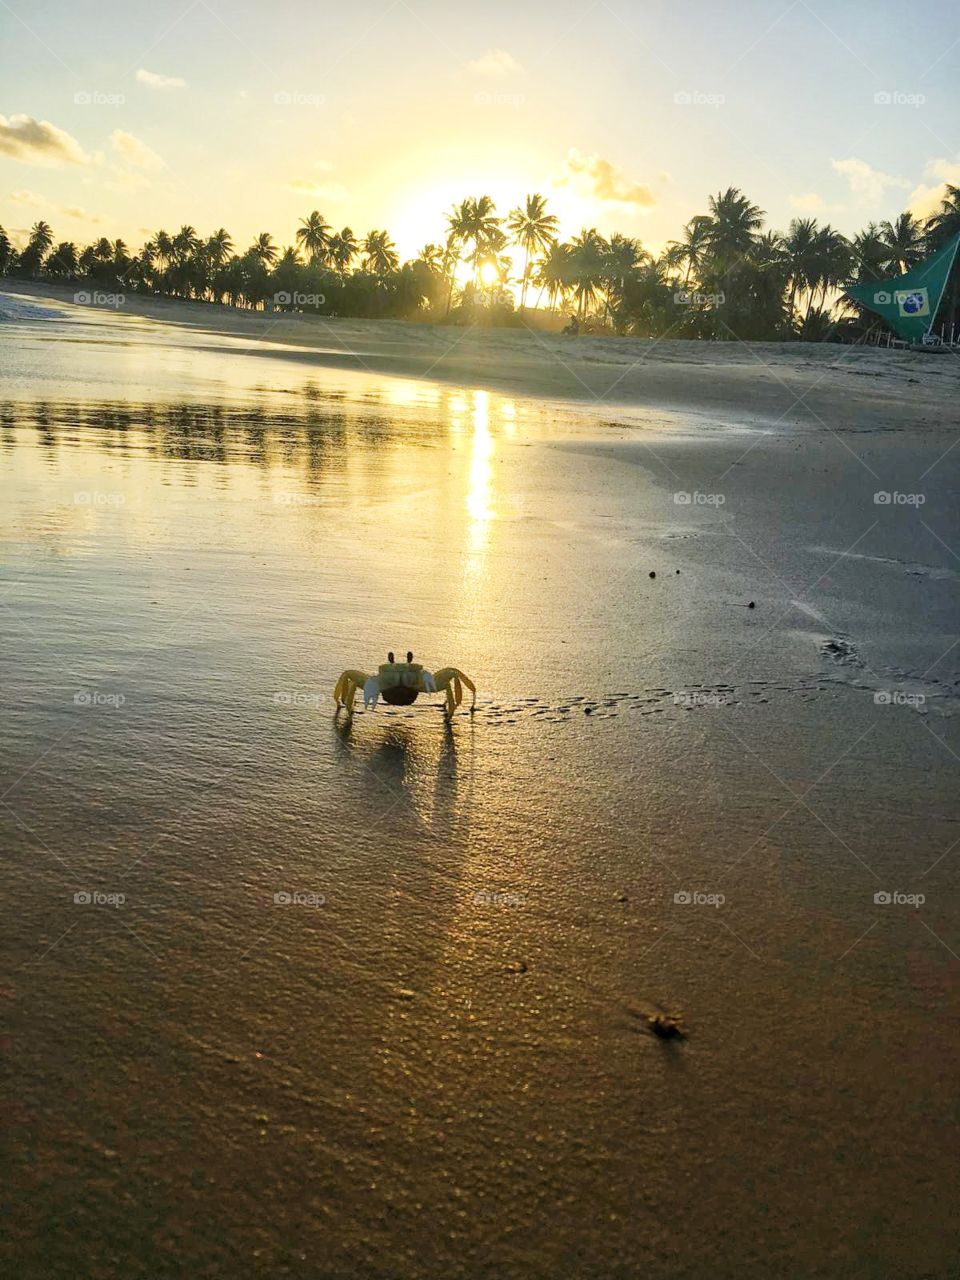 watching this amazing sunset with my new friend, little crab  (Instagram: @cecon.angelo)